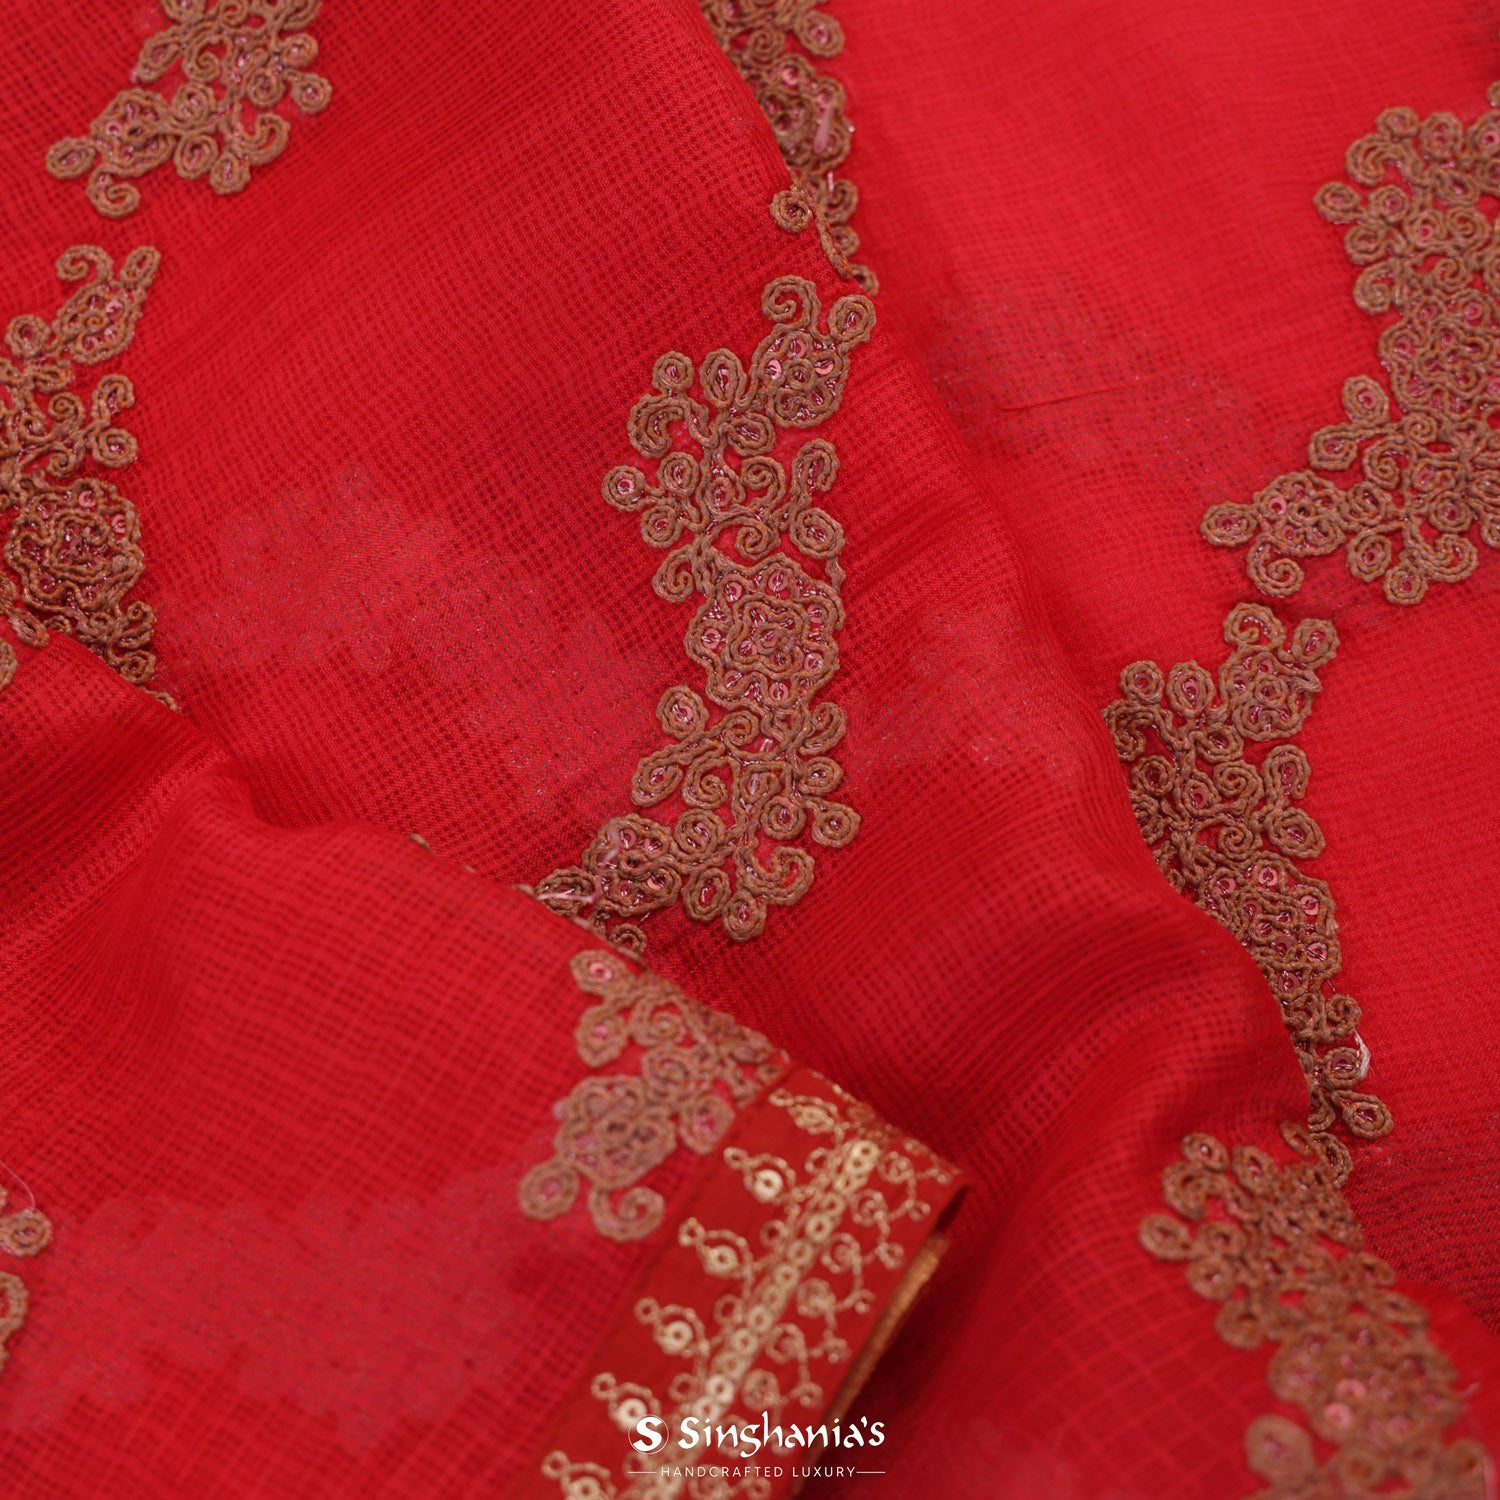 Spanish Red Kota Silk Saree With Floral Embroidery